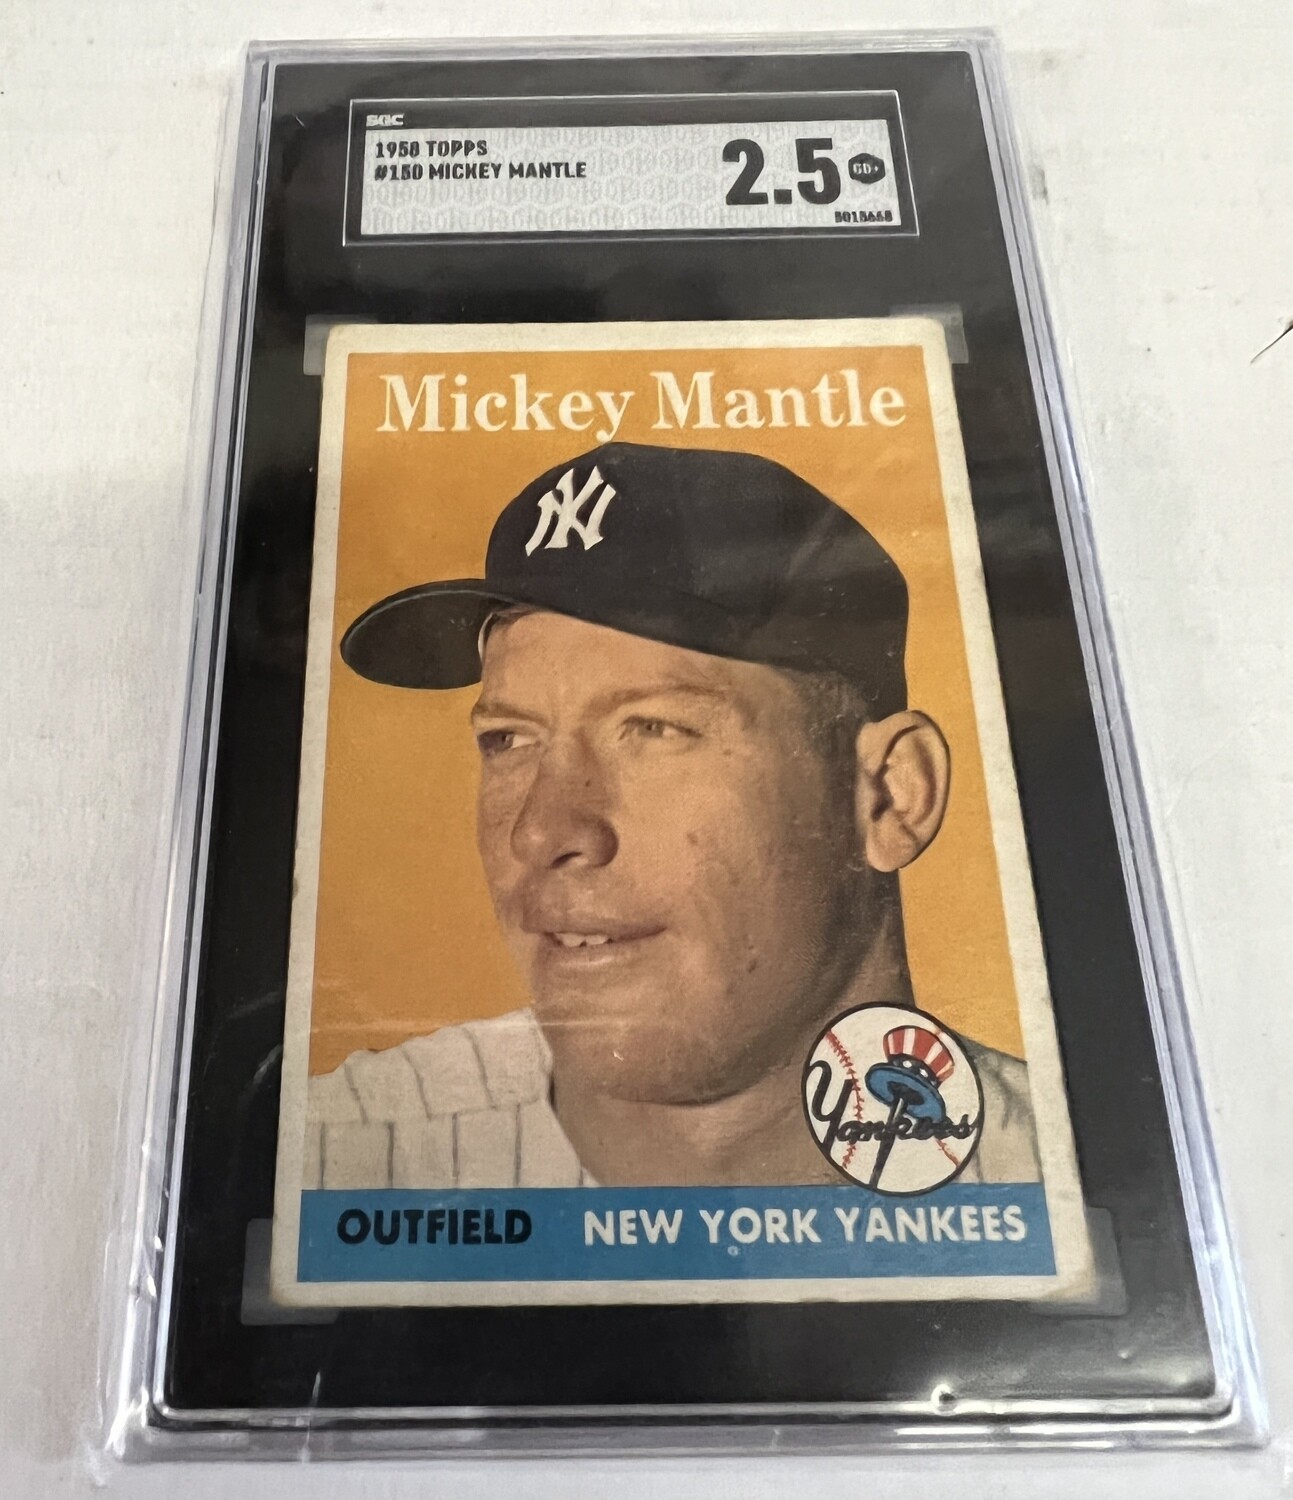 1958 Topps #150 MIckey Mantle SGC 2.5